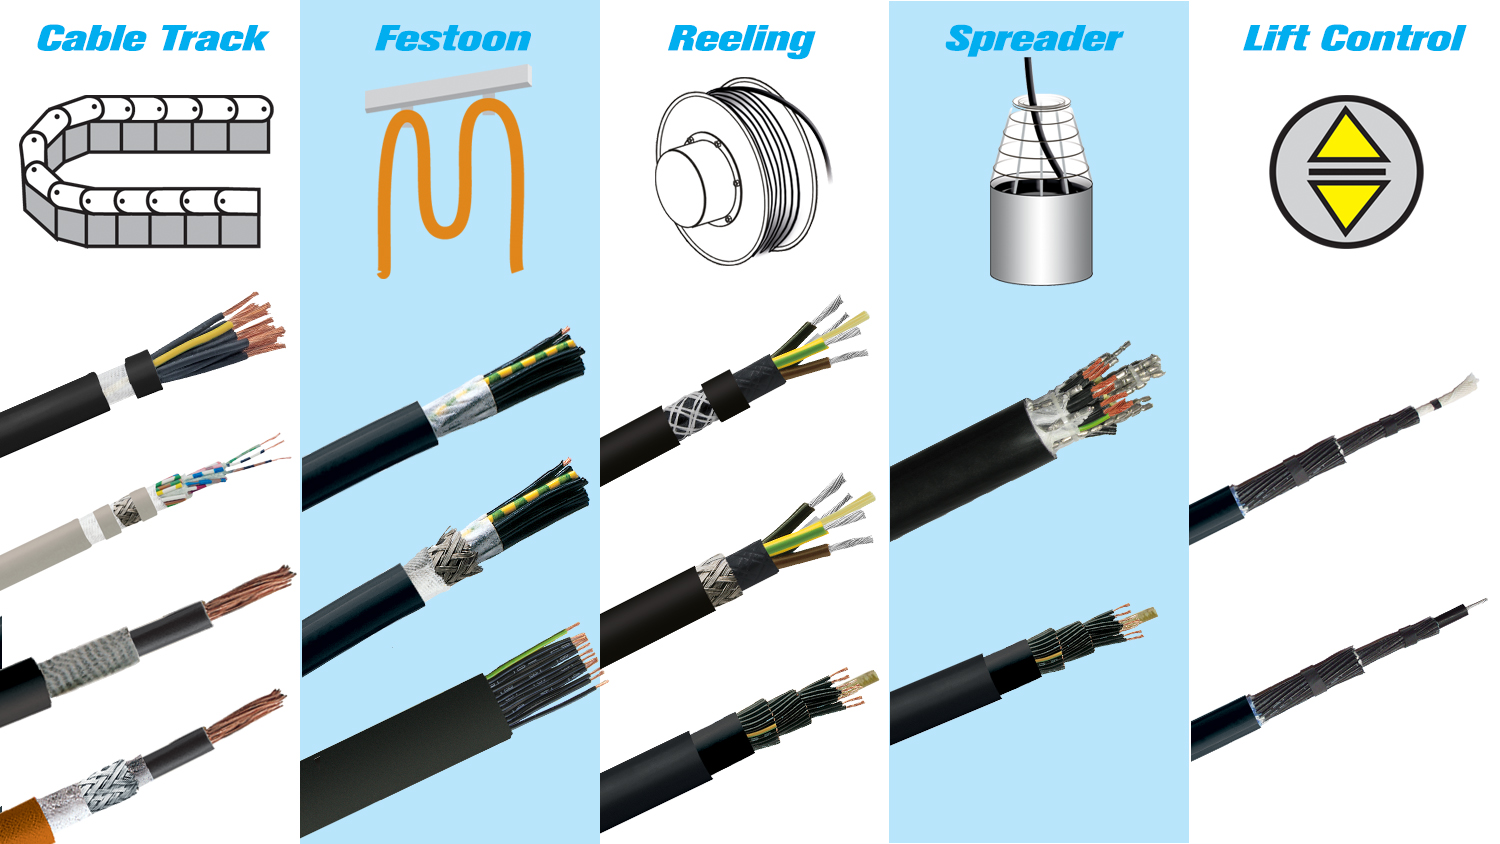 Select a Flexible Cable That Meets Your Material Handling Needs